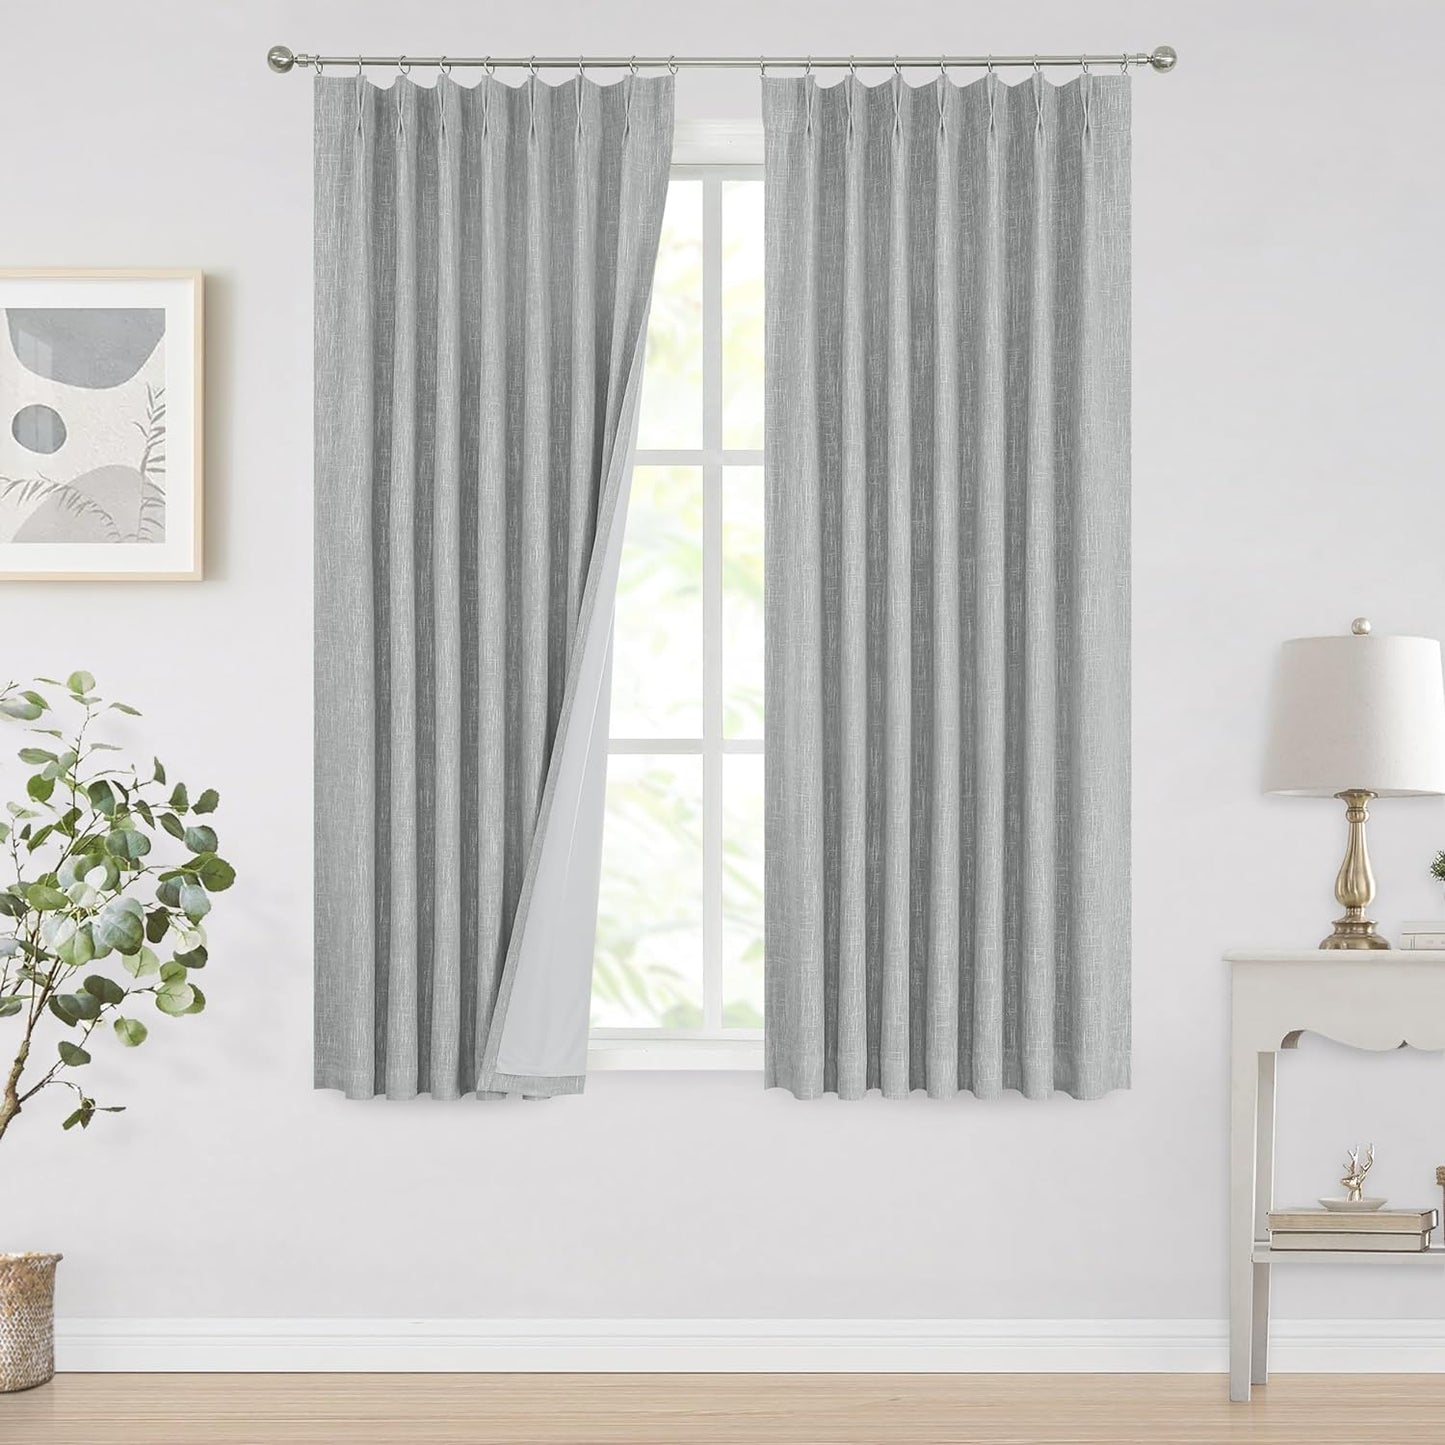 Vision Home White Pinch Pleated Full Blackout Curtains Thermal Insulated Window Curtains 84 Inch for Living Room Bedroom Room Darkening Pinch Pleat Drapes with Hooks Back Tab 2 Panel 40" Wx84 L  Vision Home Silver Grey 40"X72"X2 